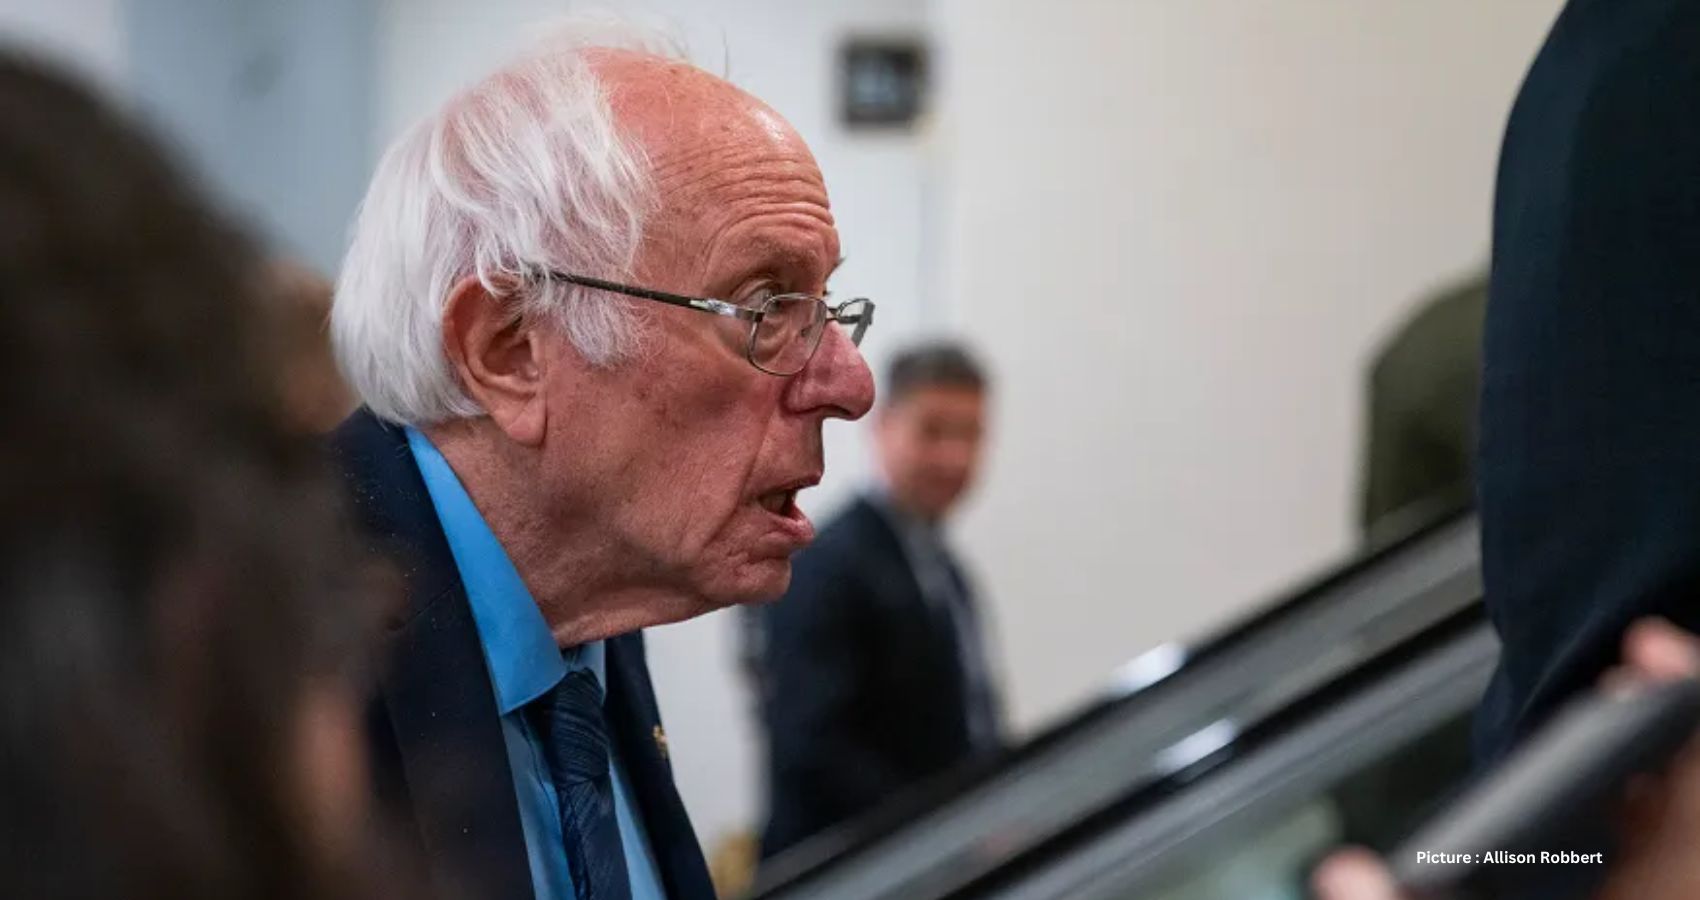 Sanders Proposes Four-Day Workweek Bill with No Pay Reduction